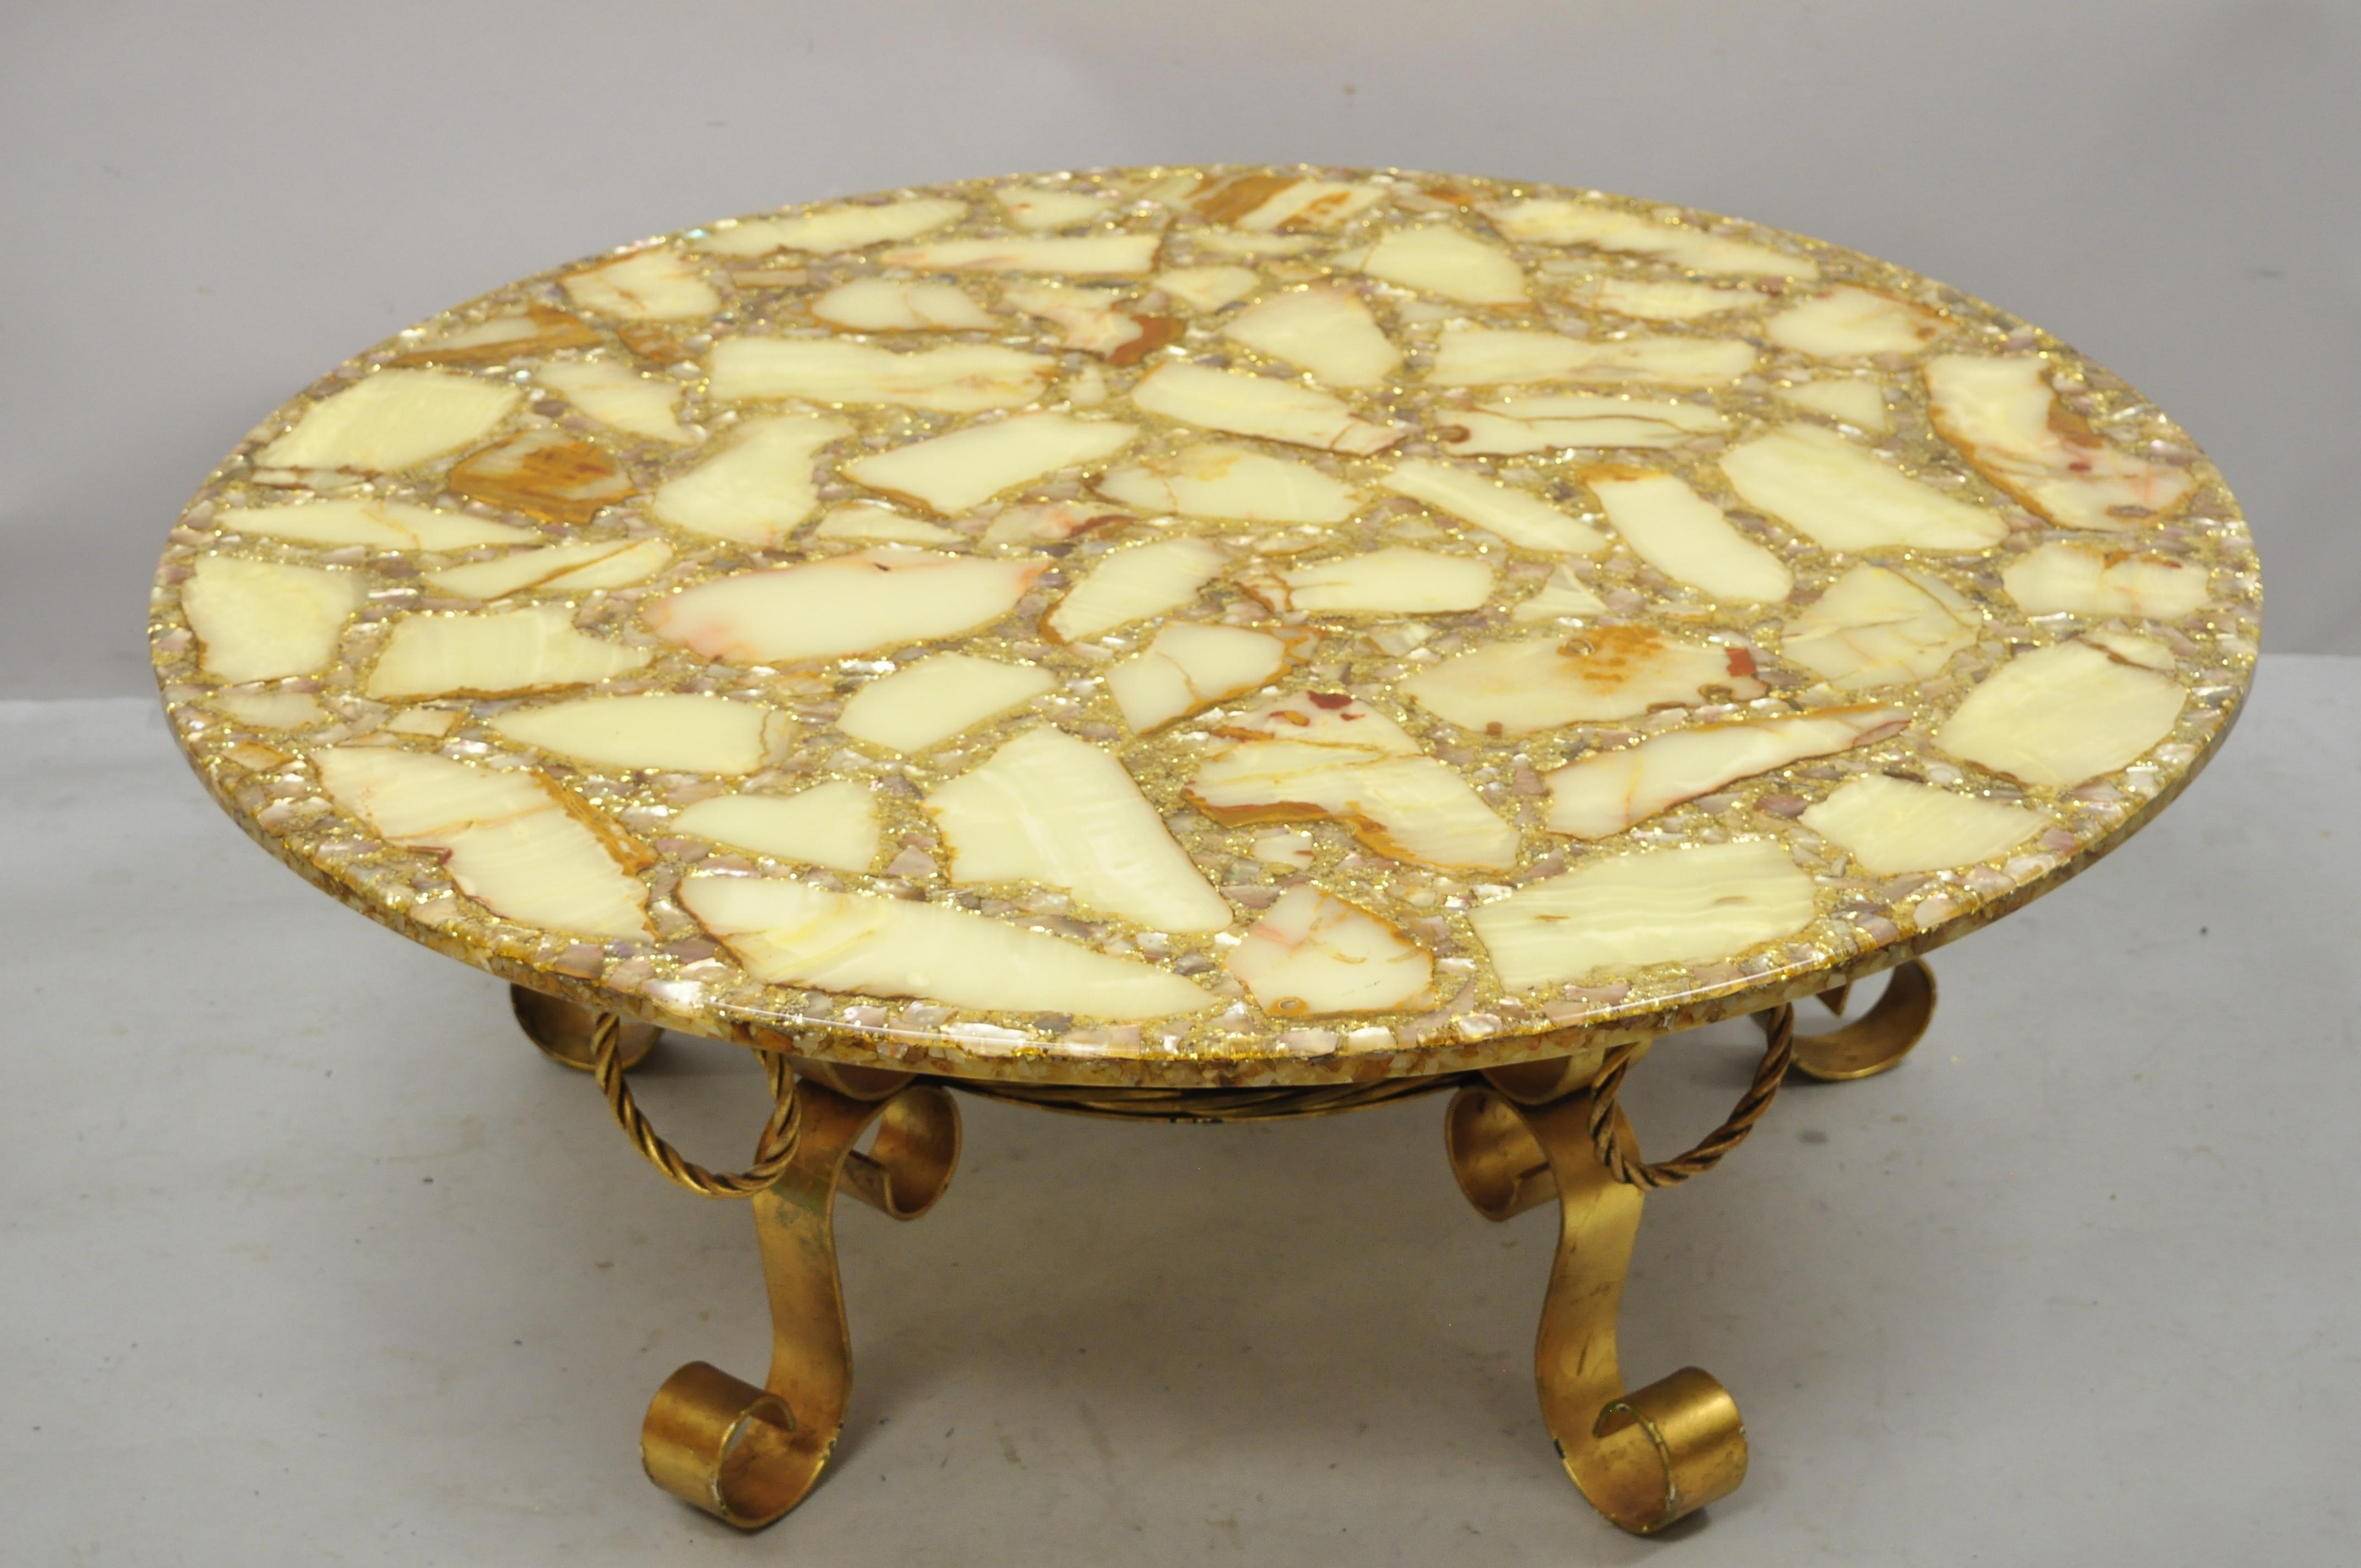 Vintage Spanish Hollywood Regency gold iron scrolling base round agate stone specimen resin top coffee table. Item features wrought iron gold finish scroll work base, round resin, stone, and agate specimen top, great quality, wonderful style and